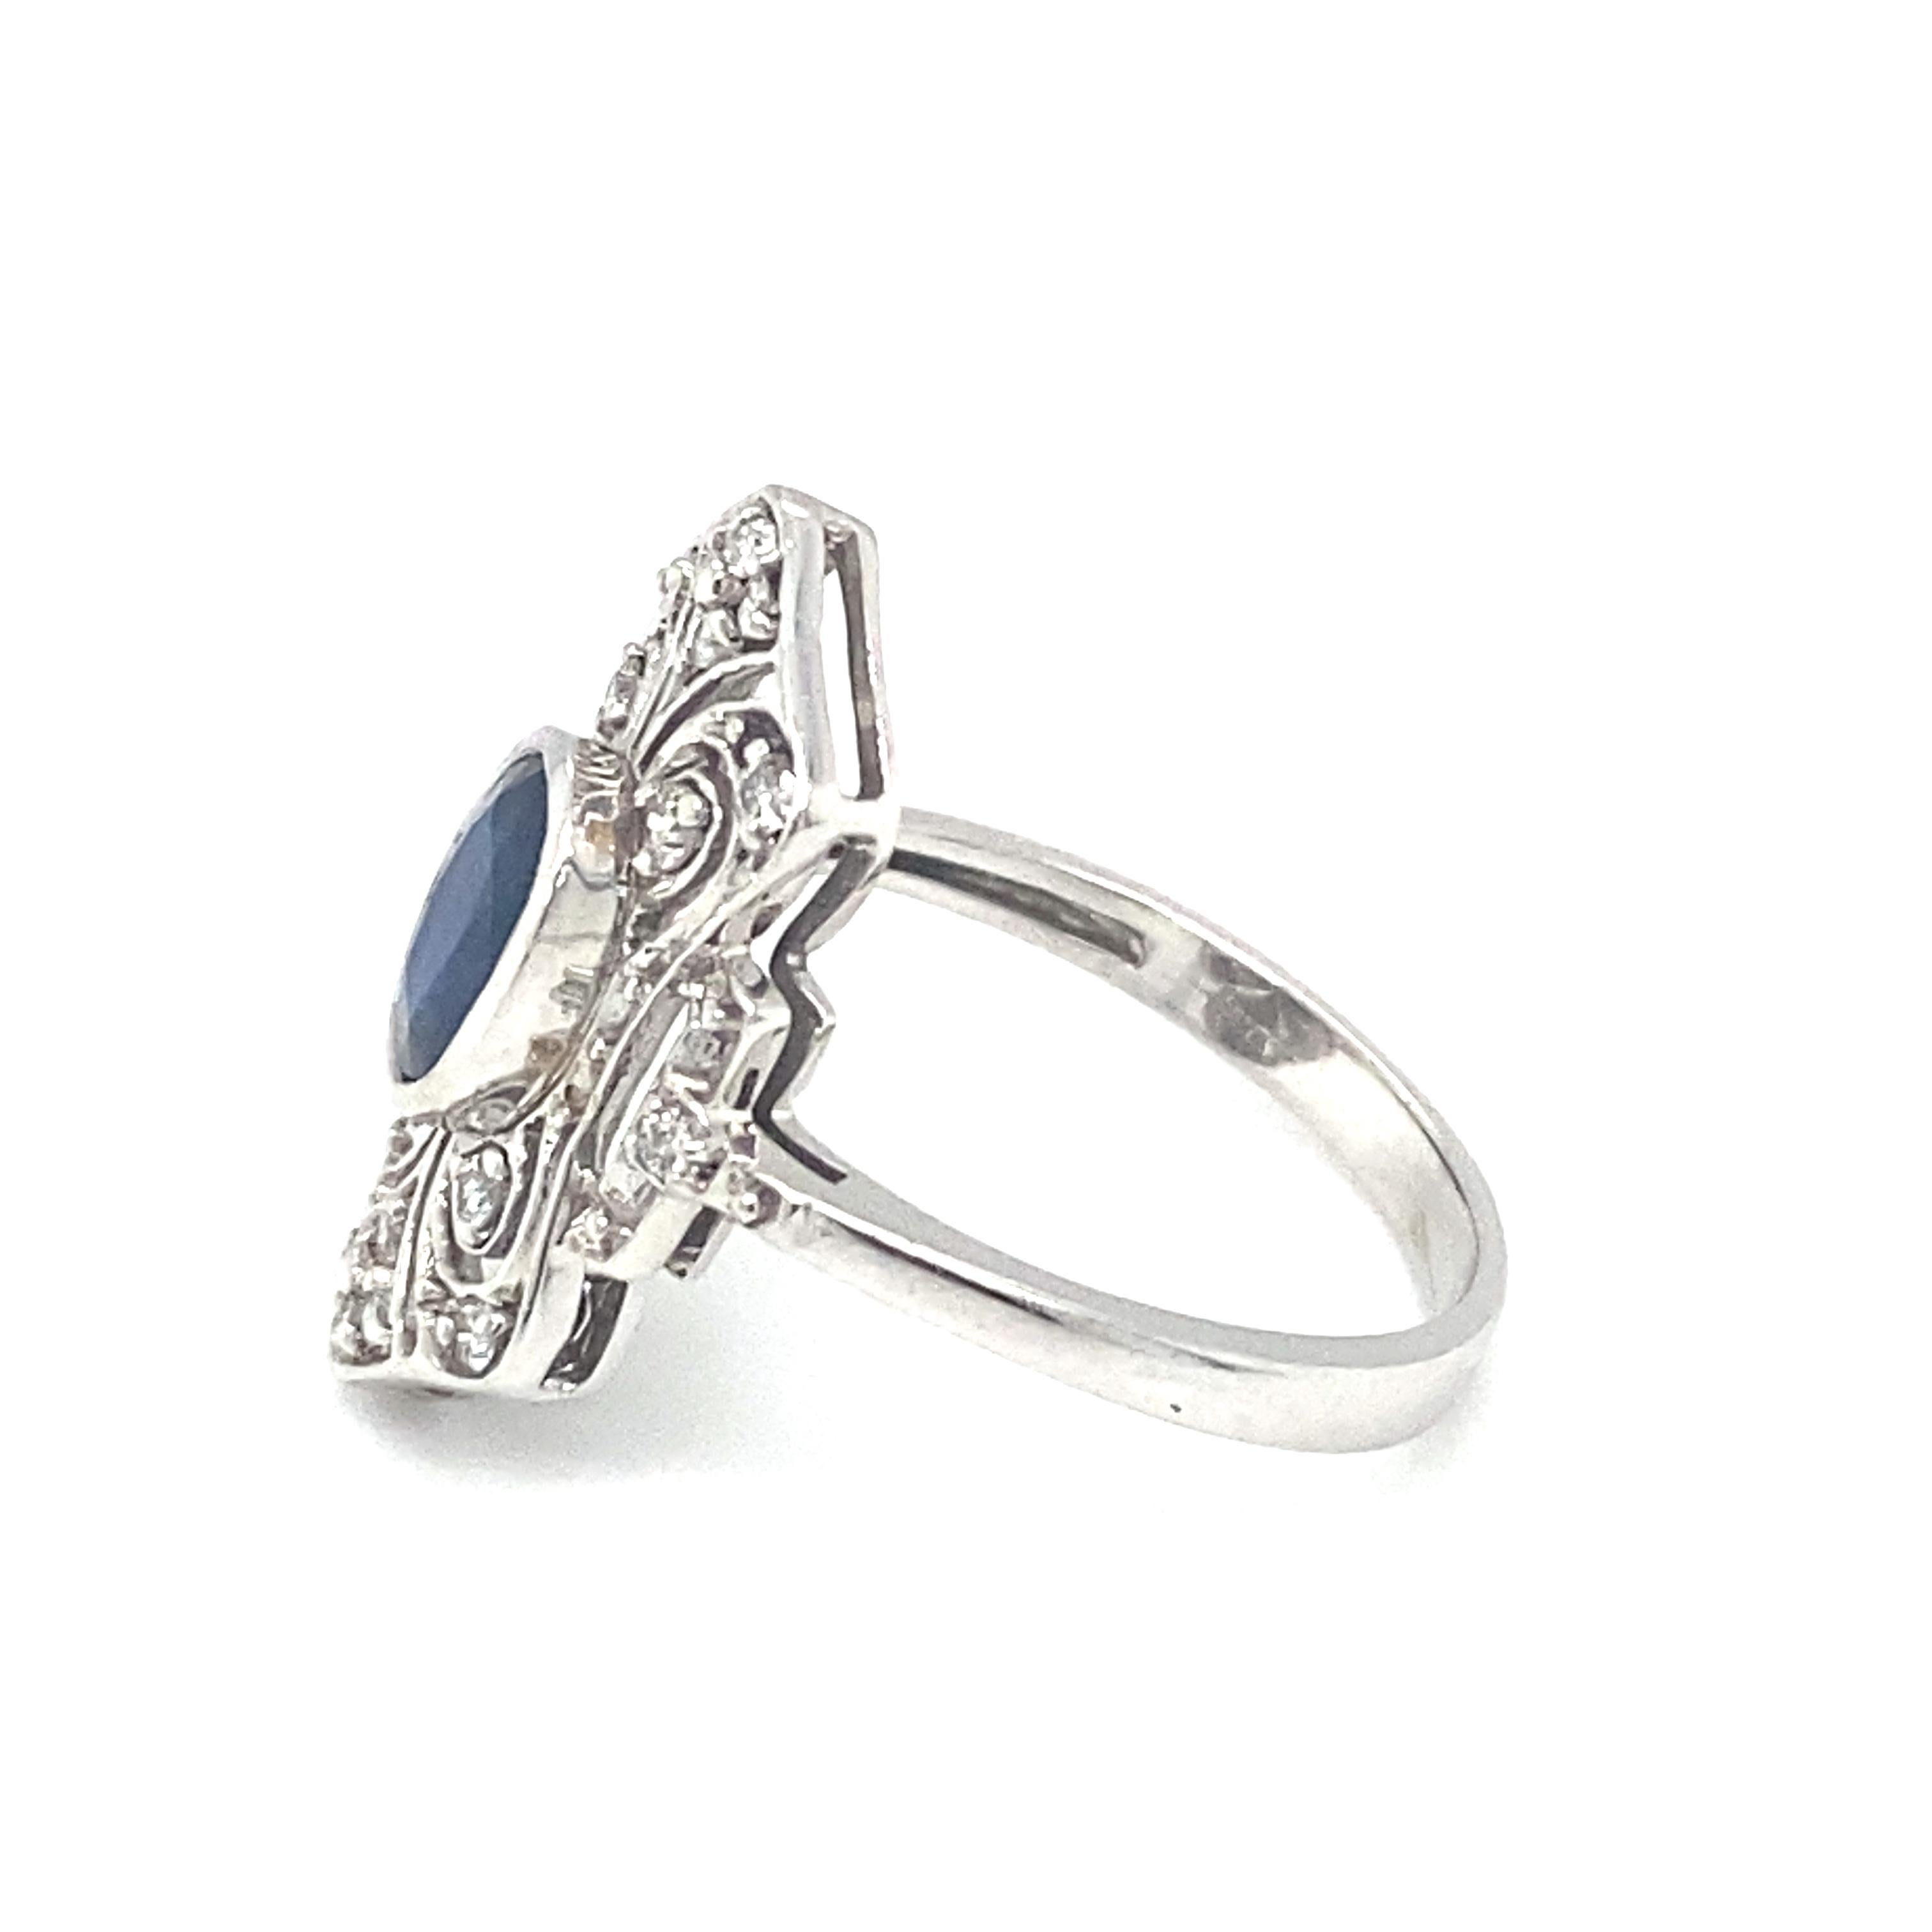 Oval Cut Circa 1950s Art Deco Style Sapphire and Diamond Cocktail Ring in 14K White Gold For Sale